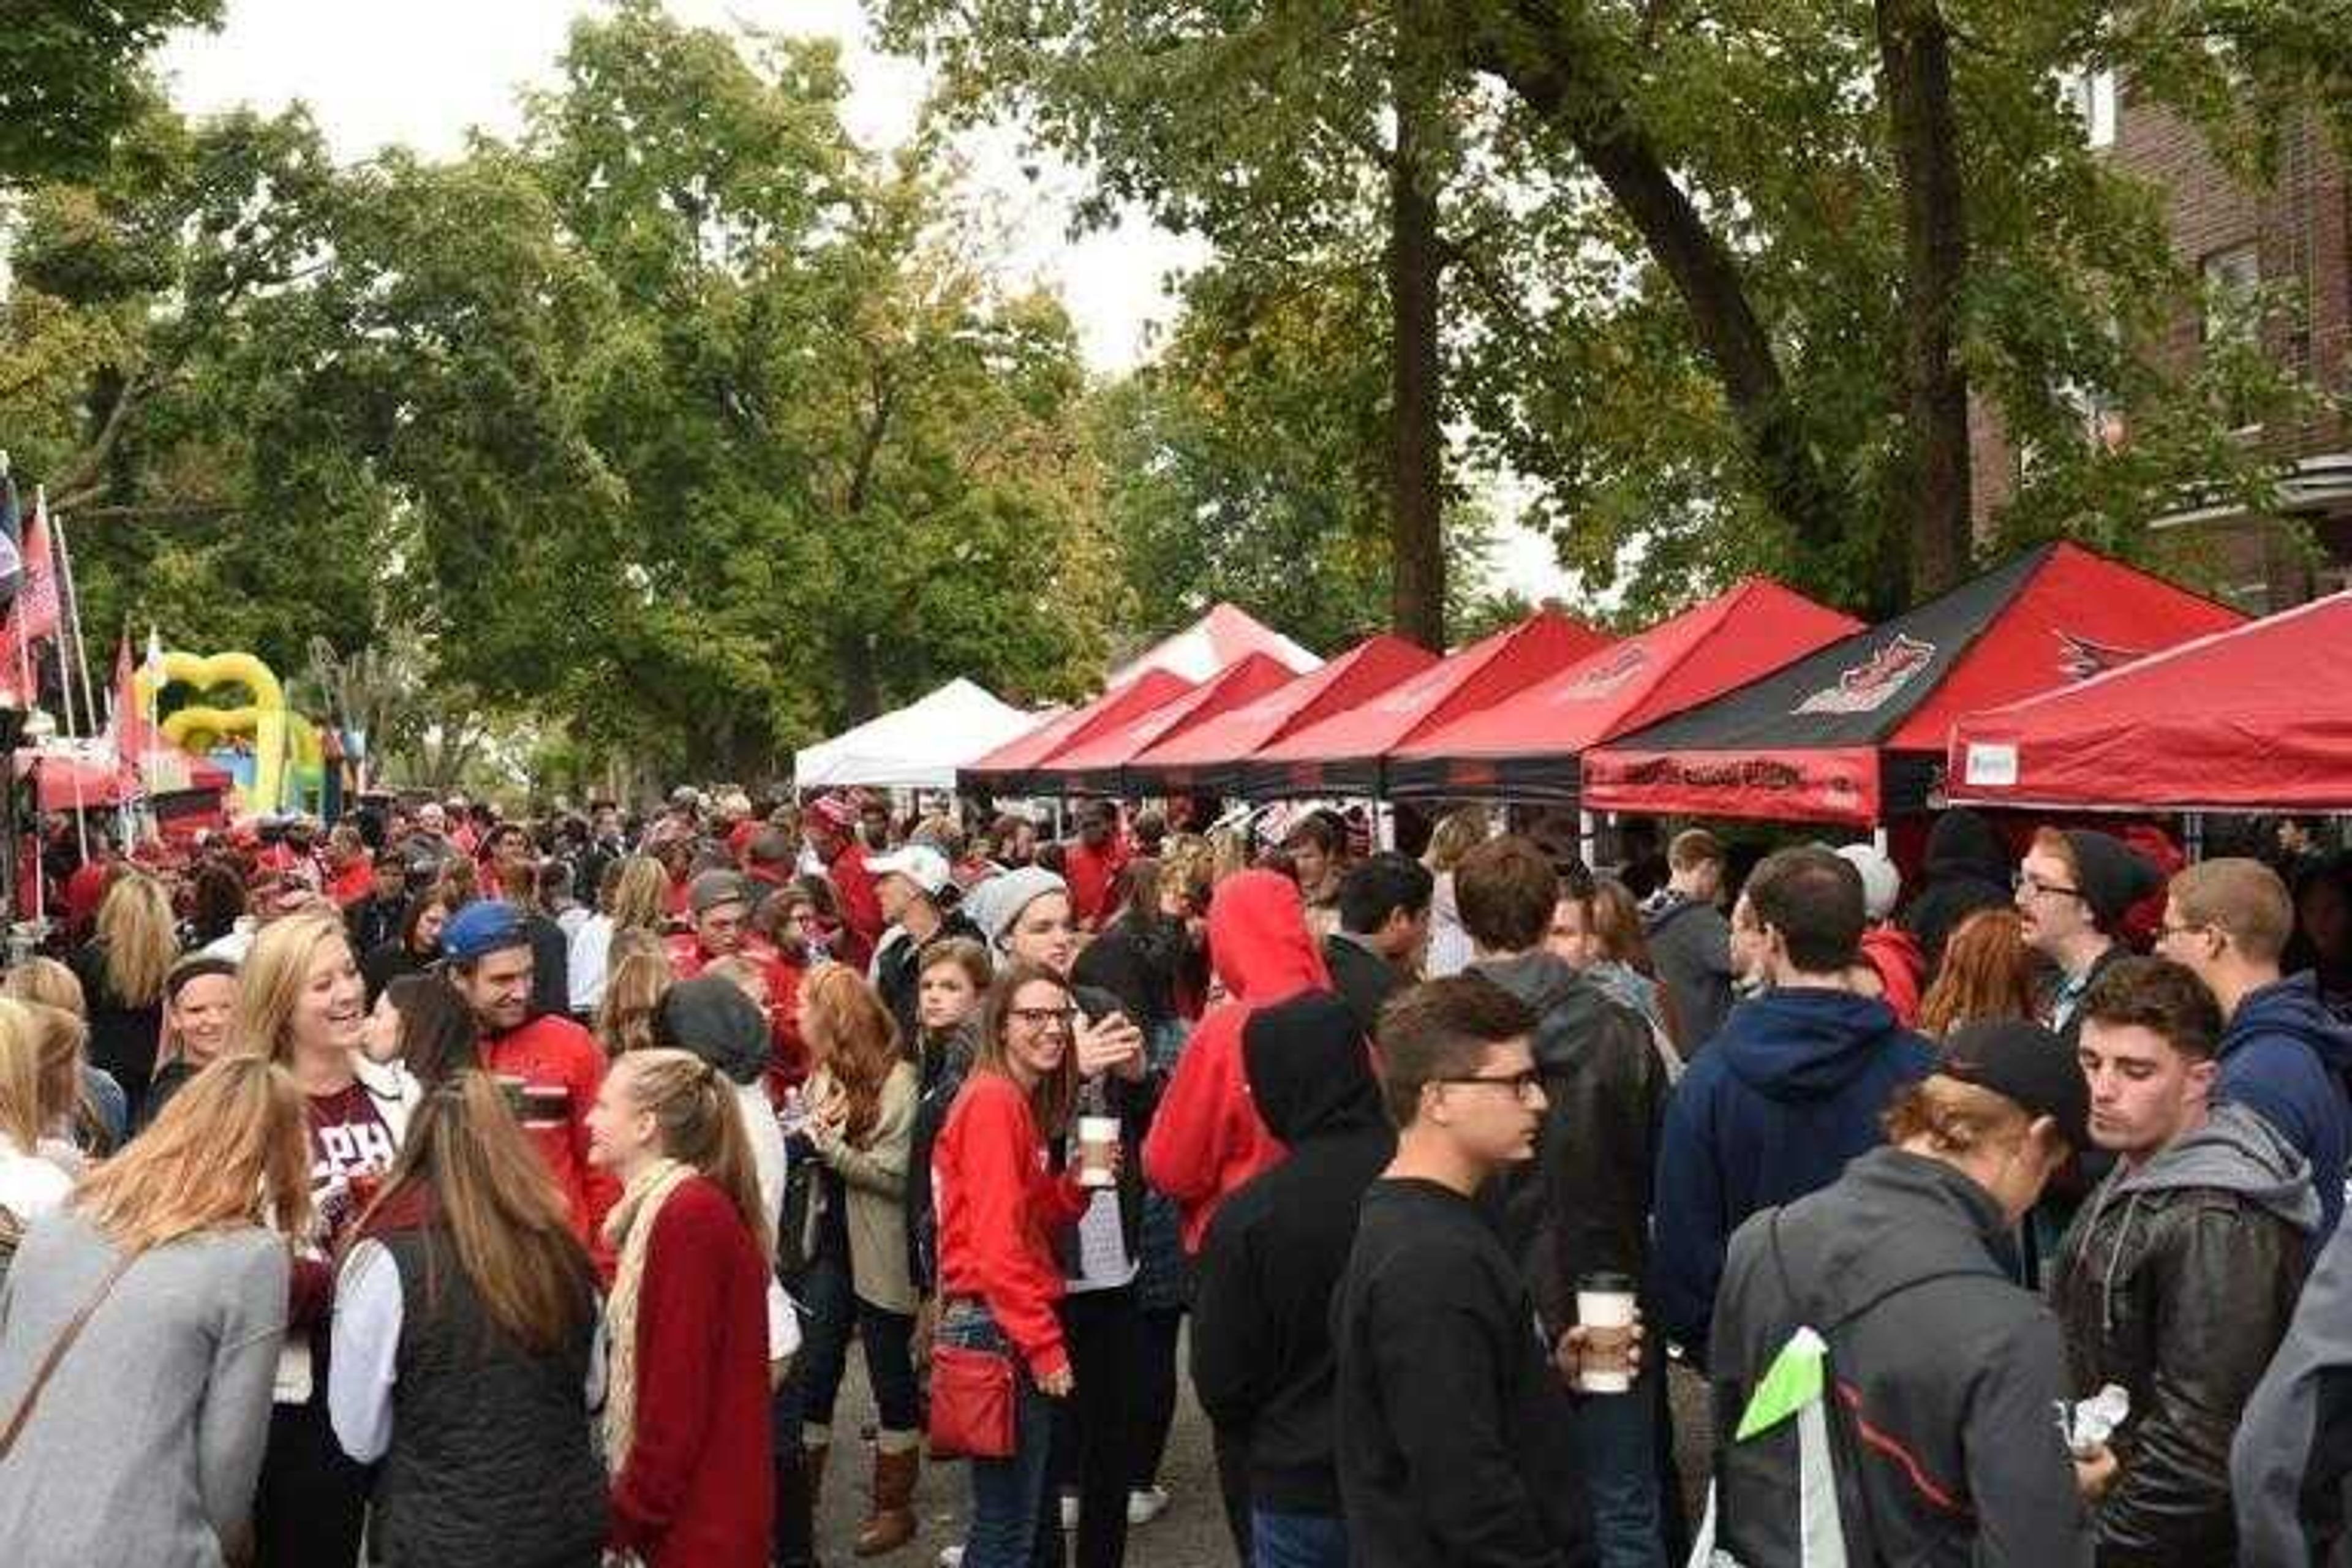 Southeast hosts tailgates outside of Houck Stadium before home football games to get everyone spirited for the game.